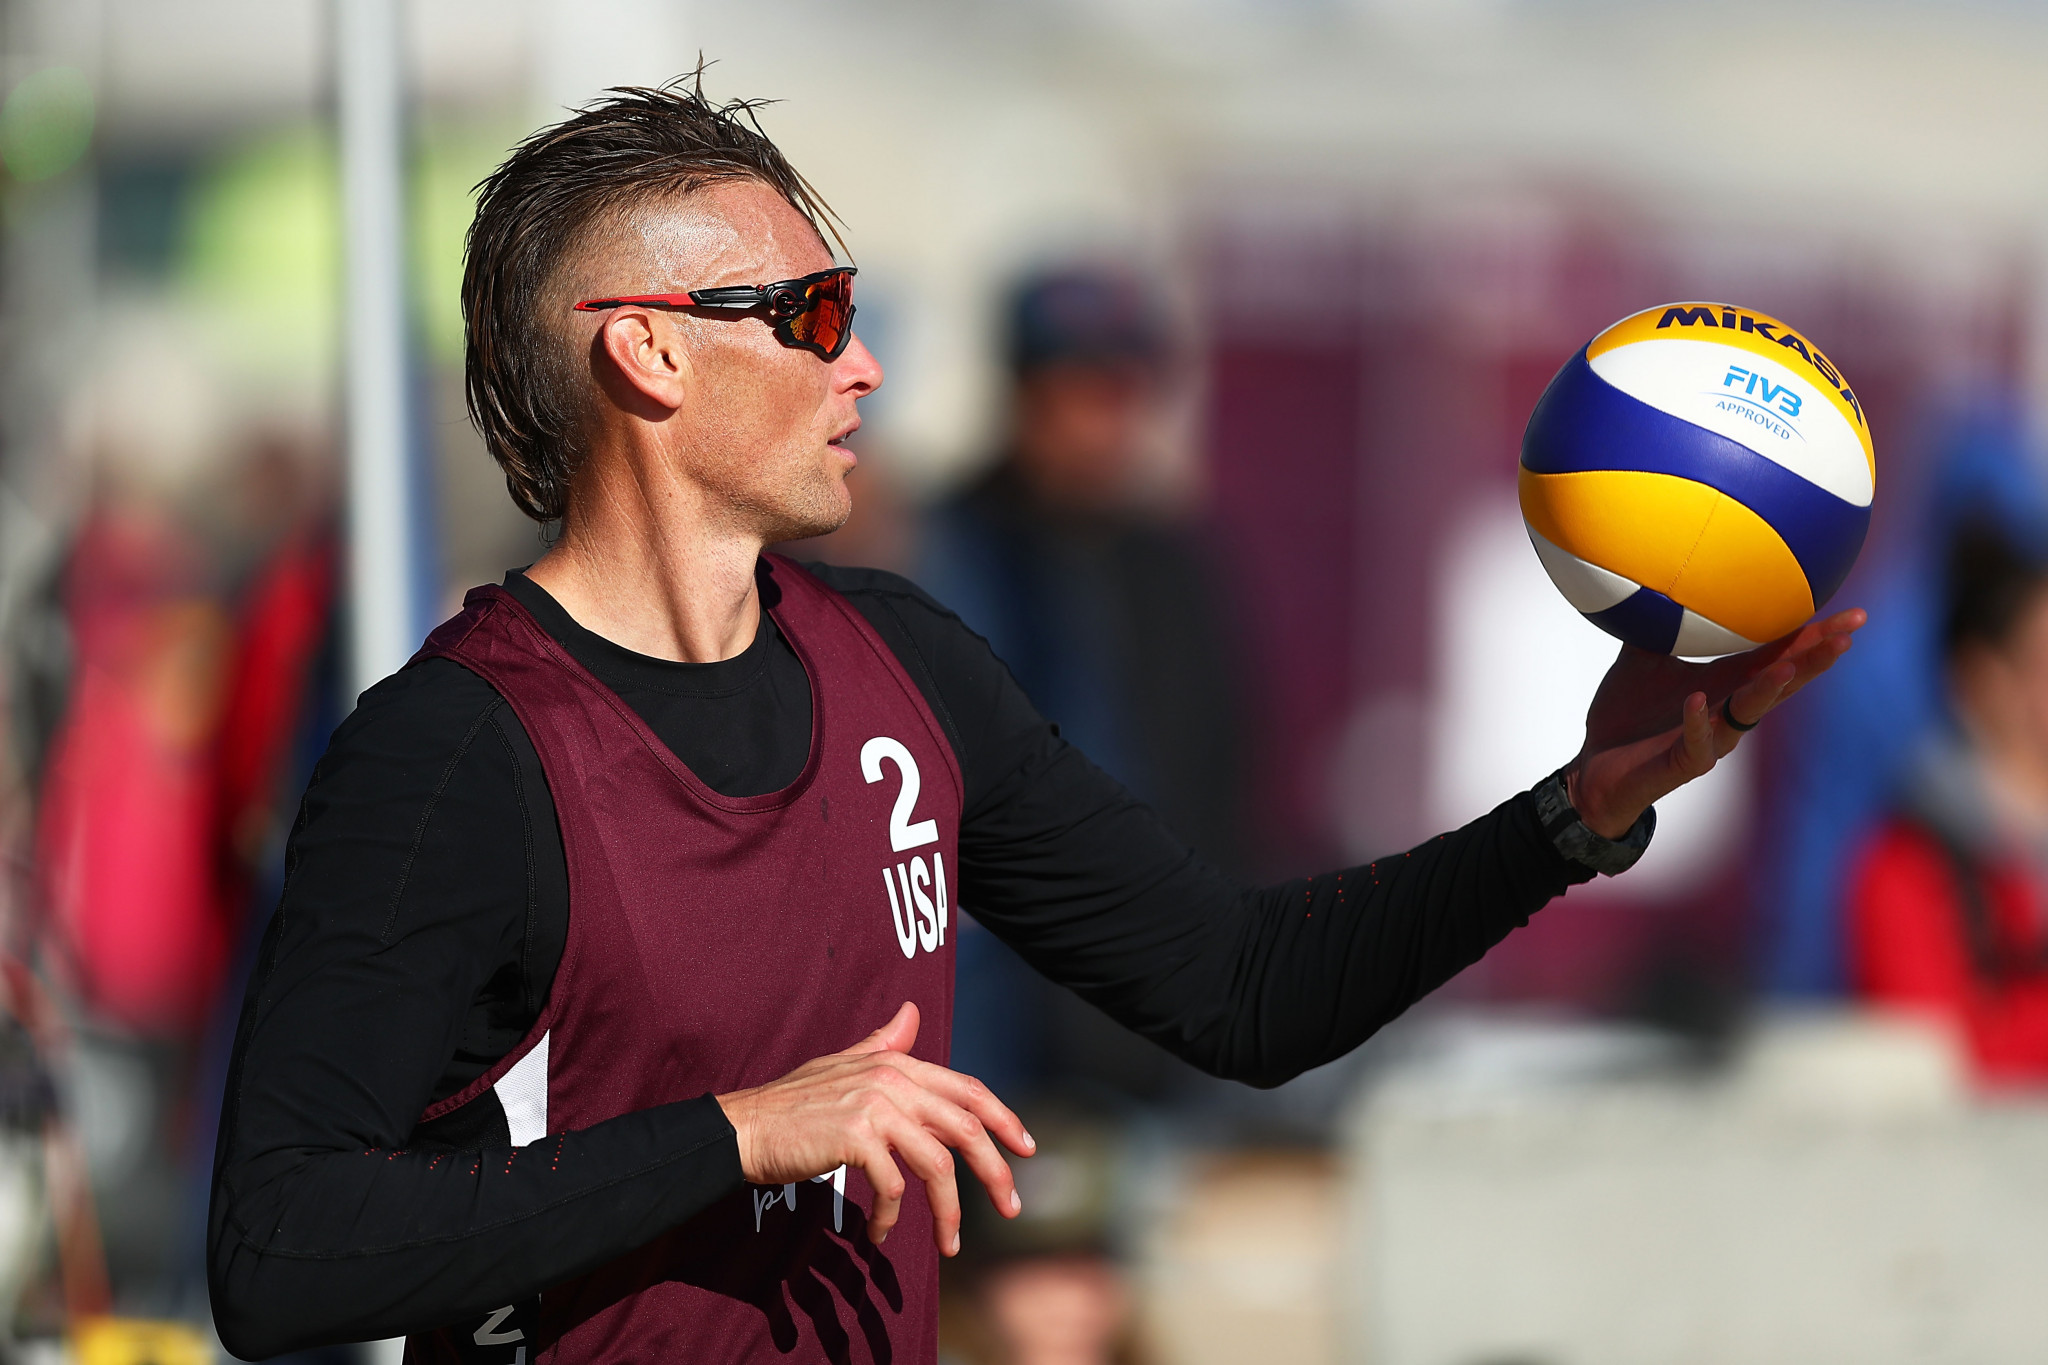 Beach volleyballer Casey Patterson is among the 69 athletes named on the United States' team for the 2019 ANOC World Beach Games ©Getty Images